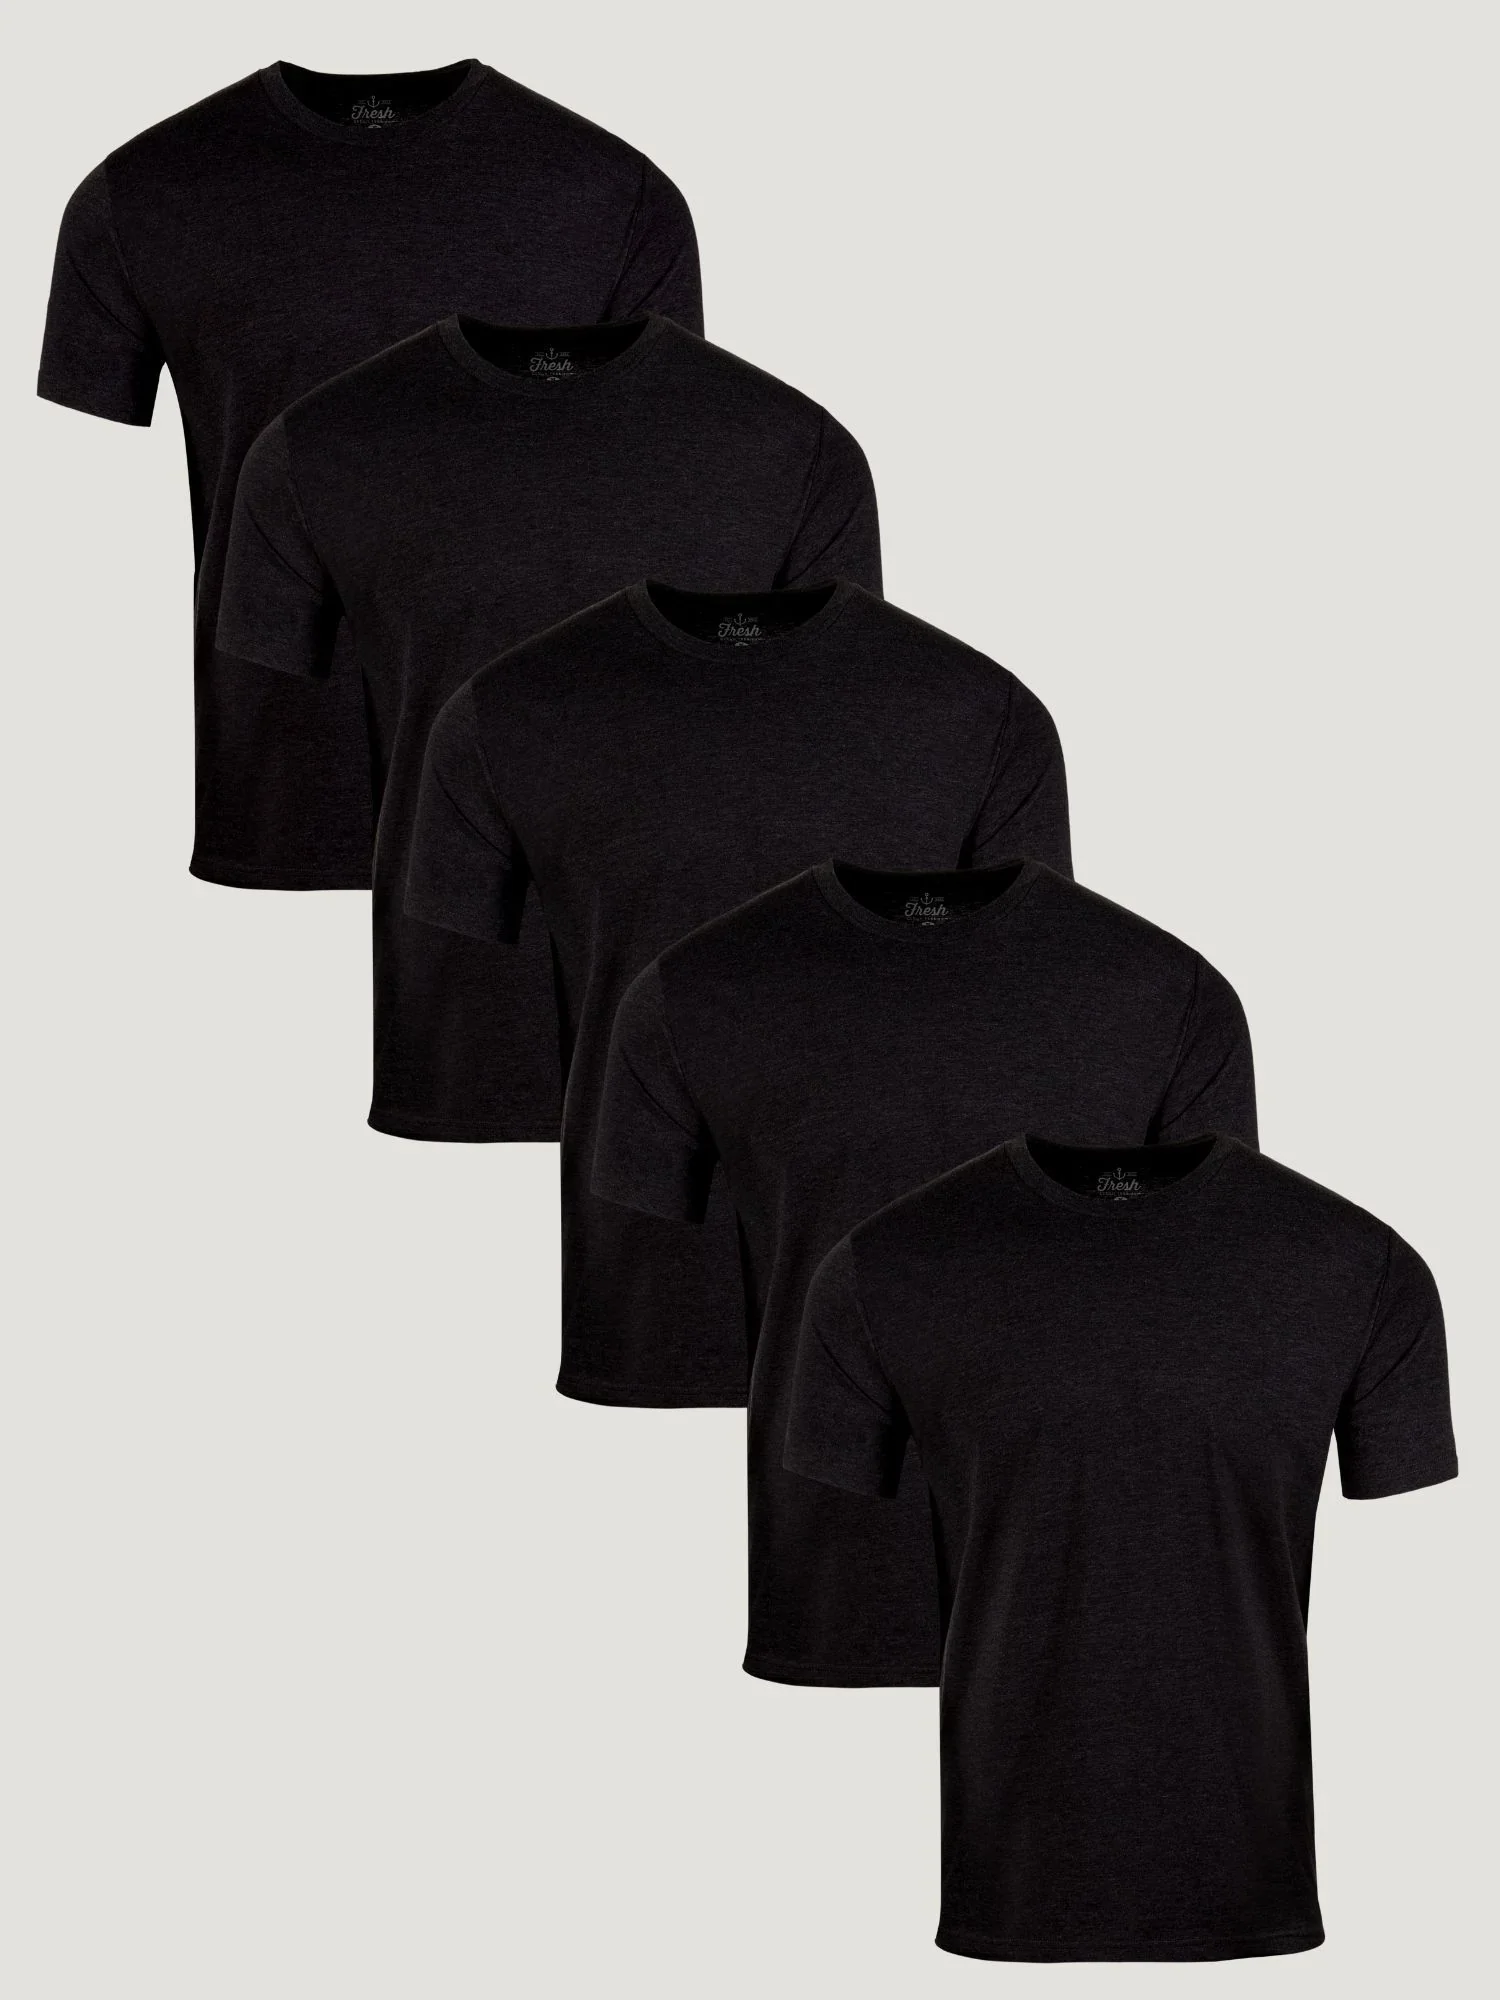 Image of All Black 5-Pack